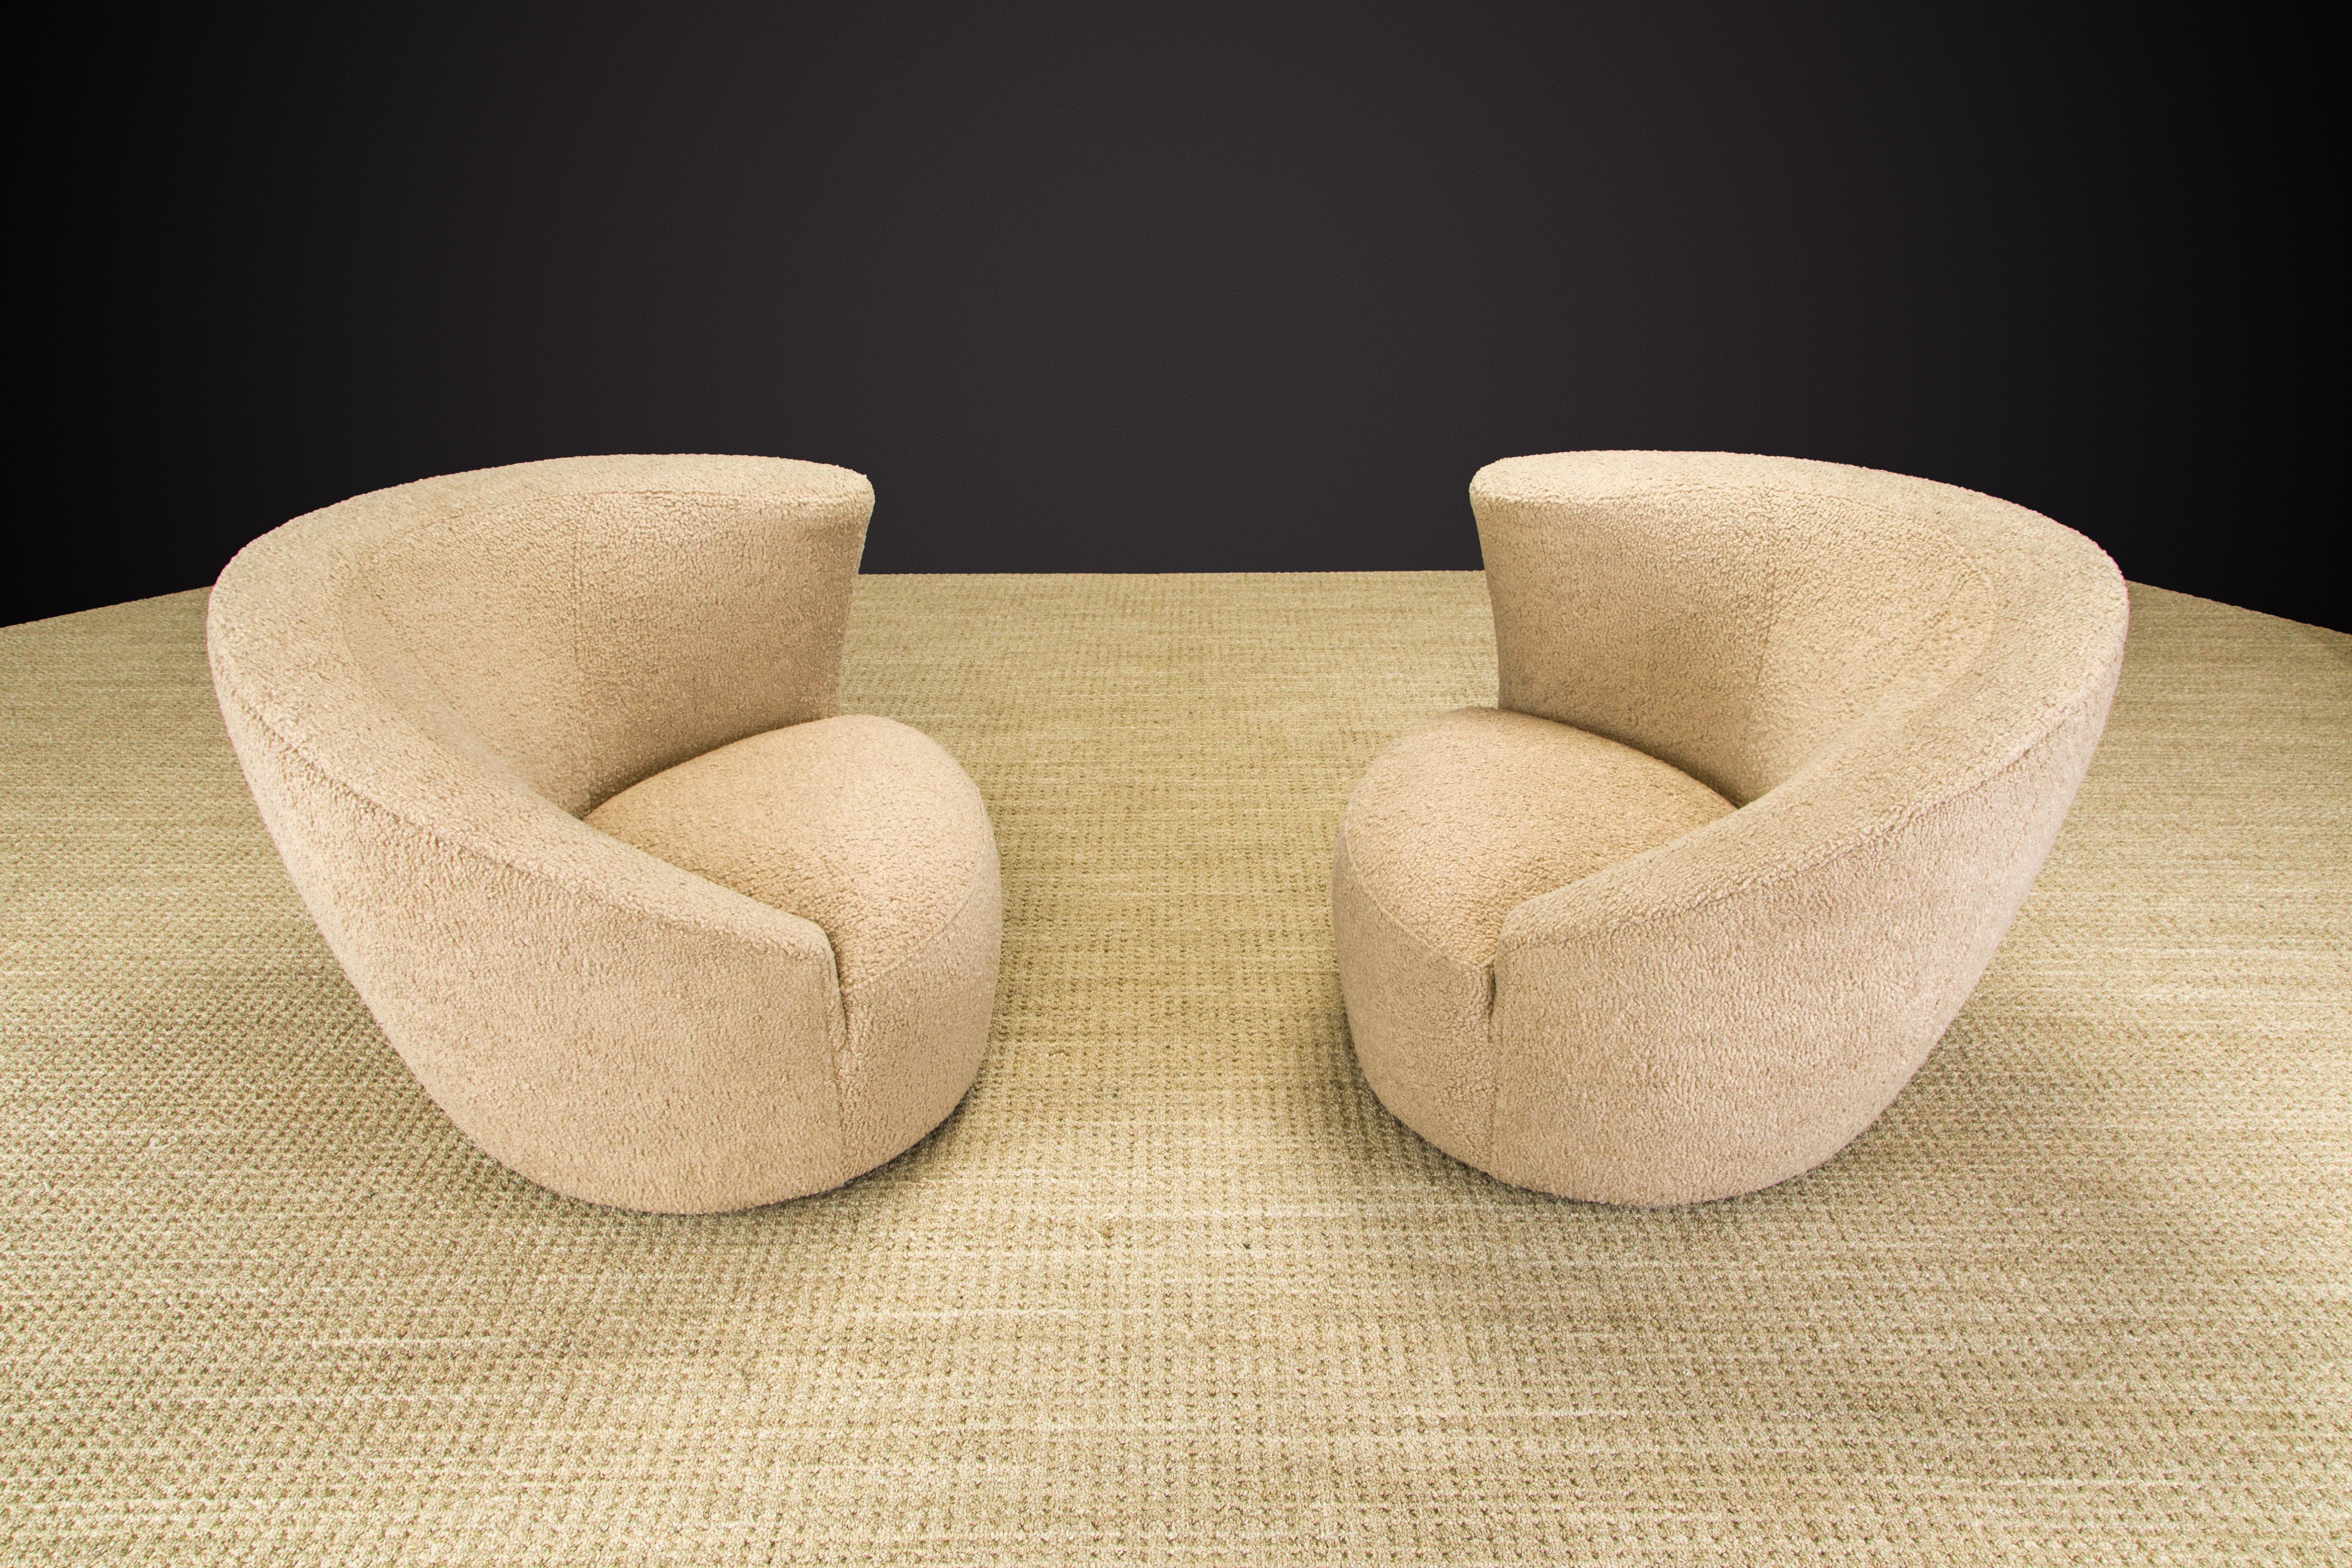 Vladimir Kagan Pair of Corkscrew Swivel Chairs for Directional in Bouclé, Signed 3